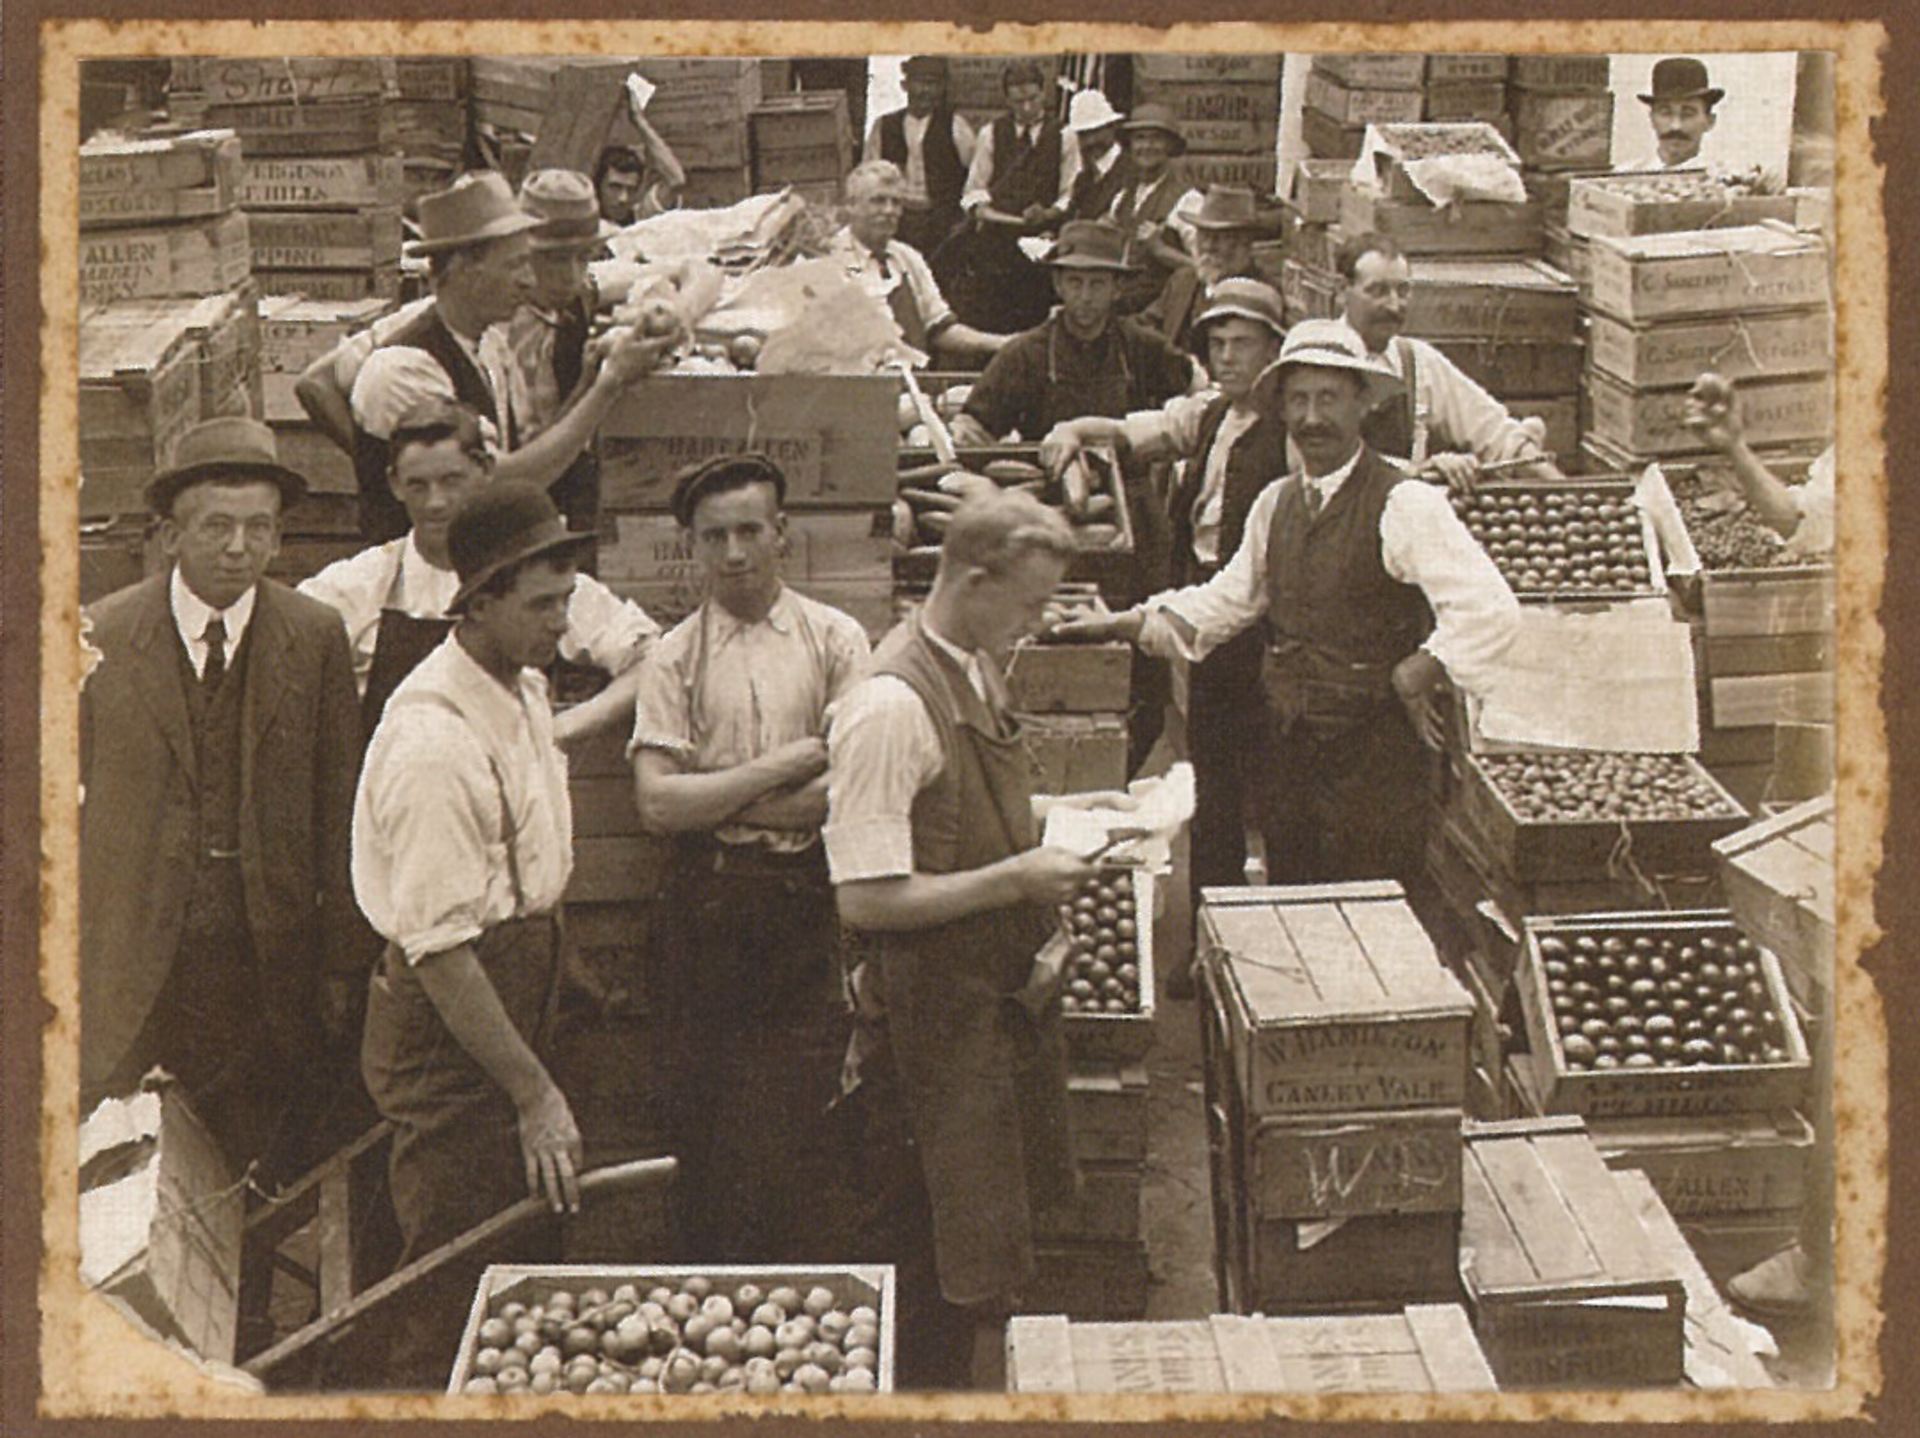 Brand research of historical sepia photograph of Goulburn Valley workers with crates of fresh fruit Our Revolution